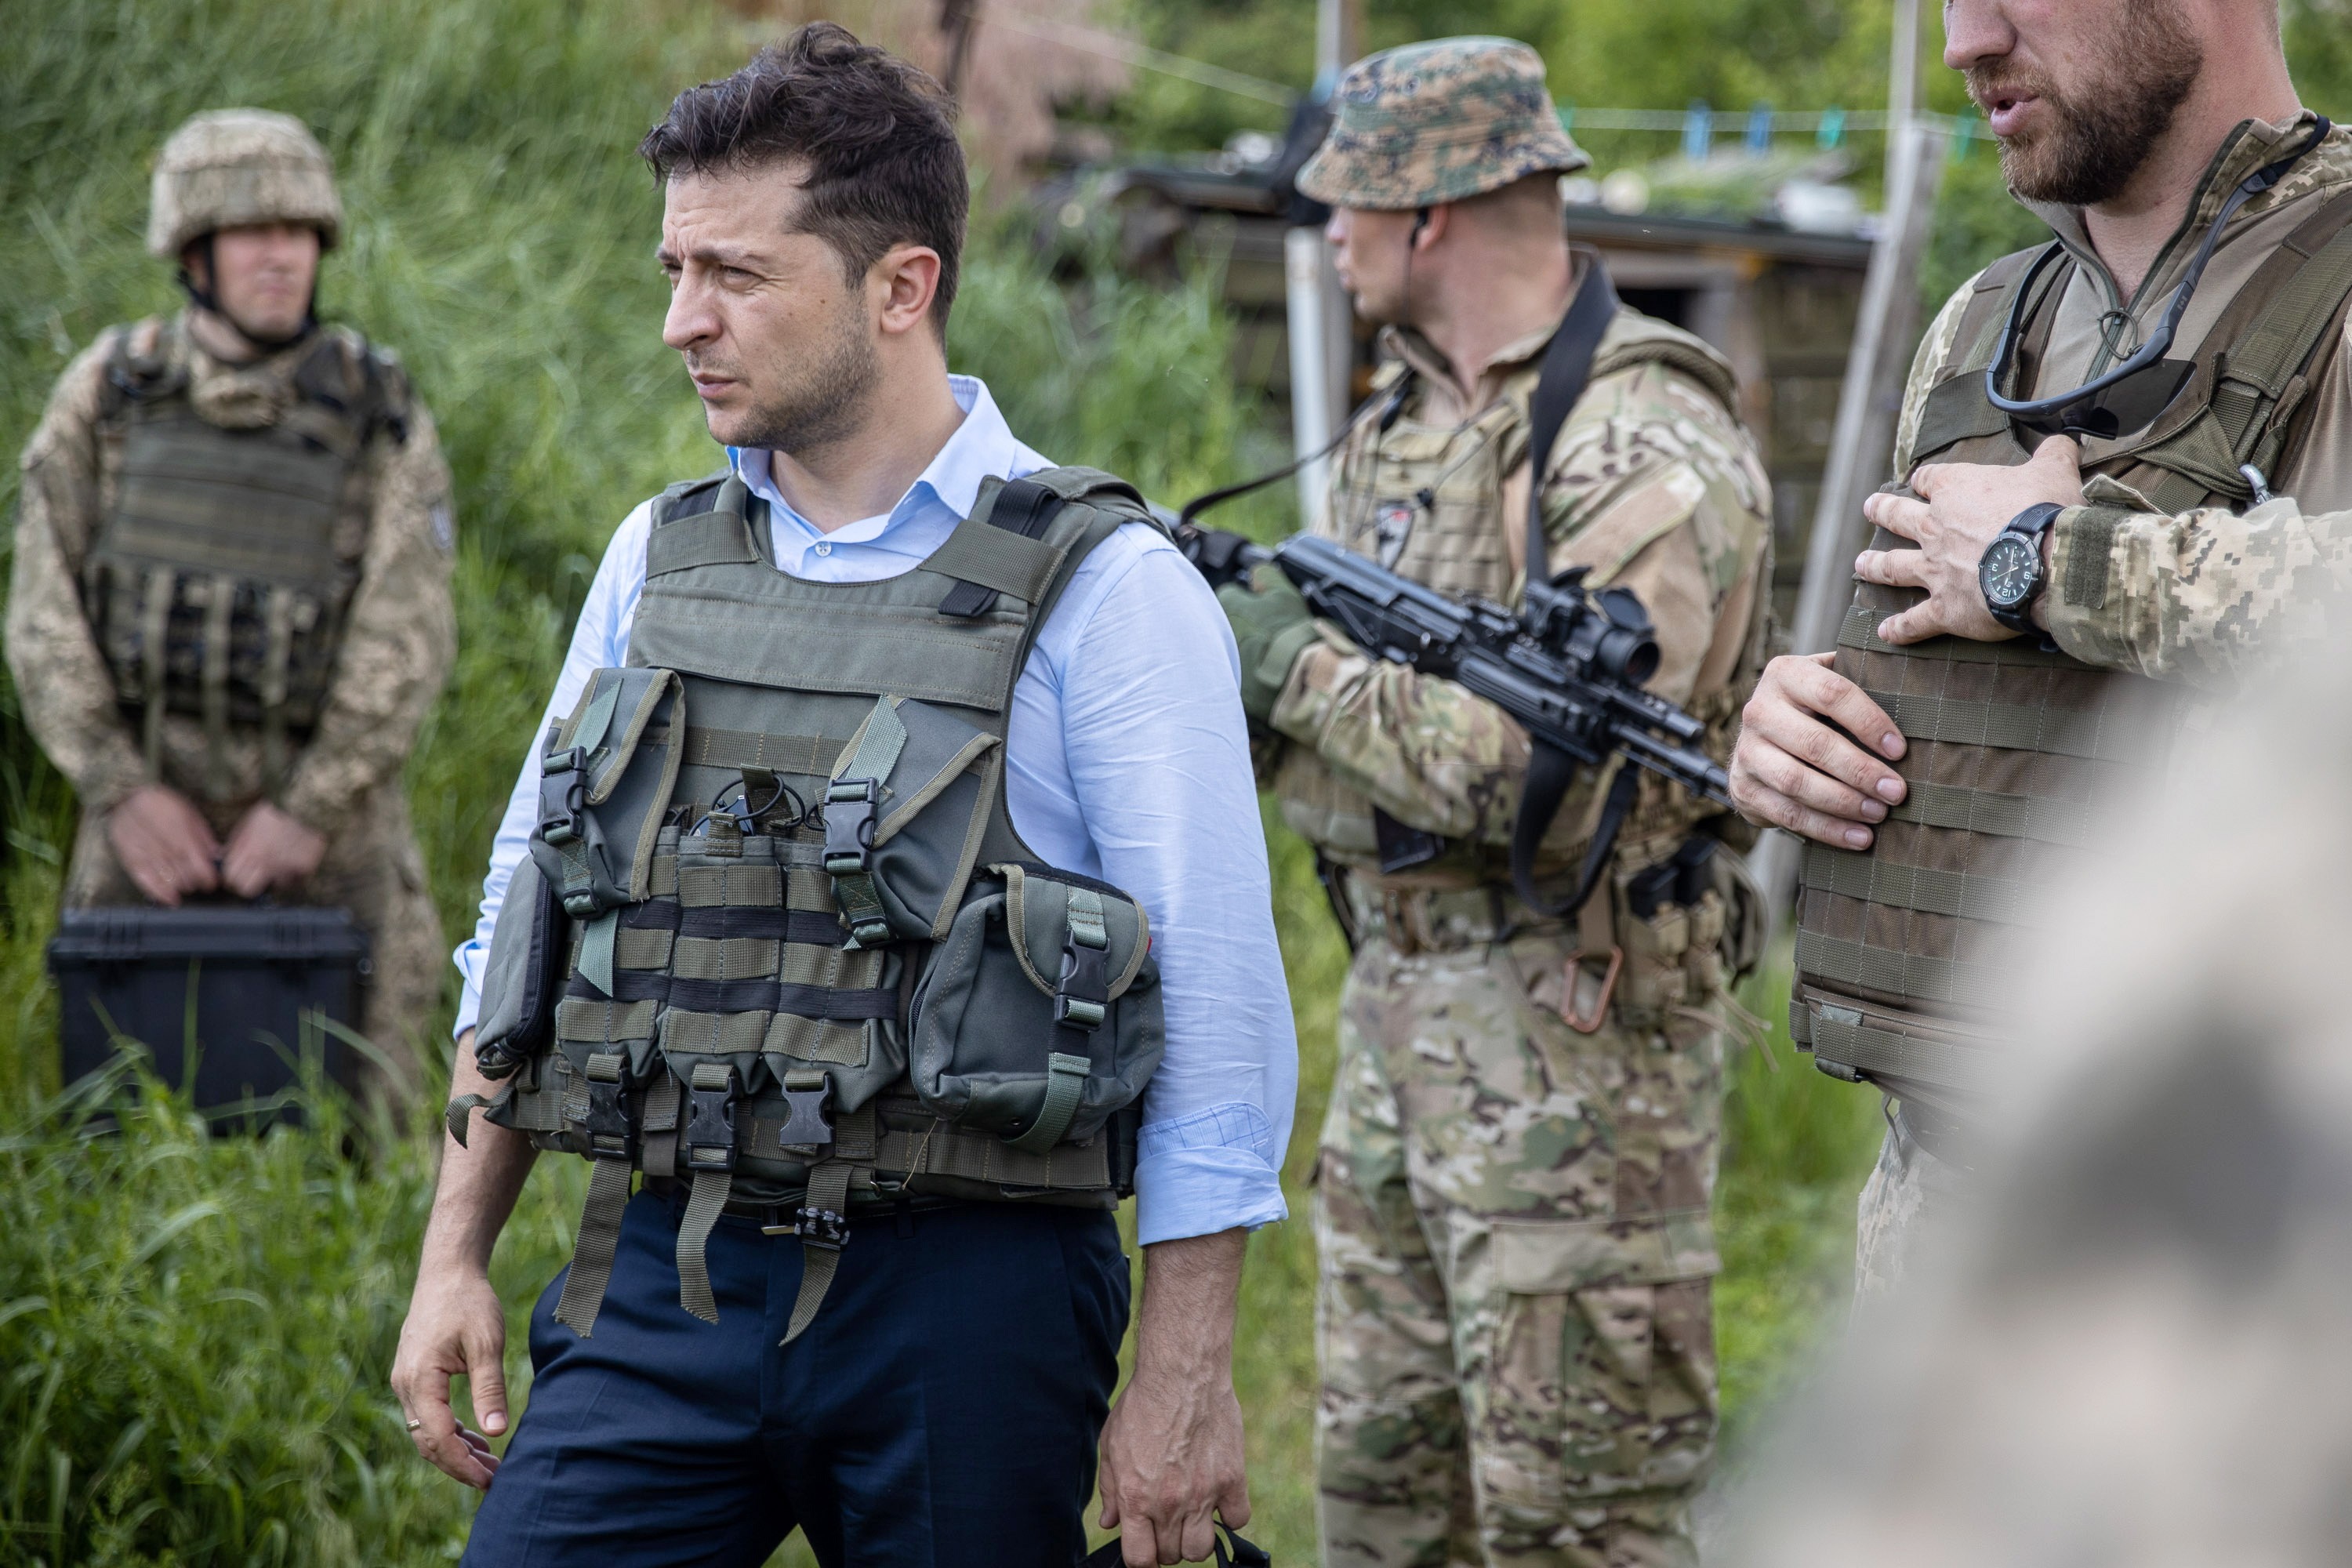 Ukraine’s President Volodymyr Zelensky visits the front line not far from pro-Russian rebels' controlled territory in the Luhansk region, eastern Ukraine. Photo: EPA